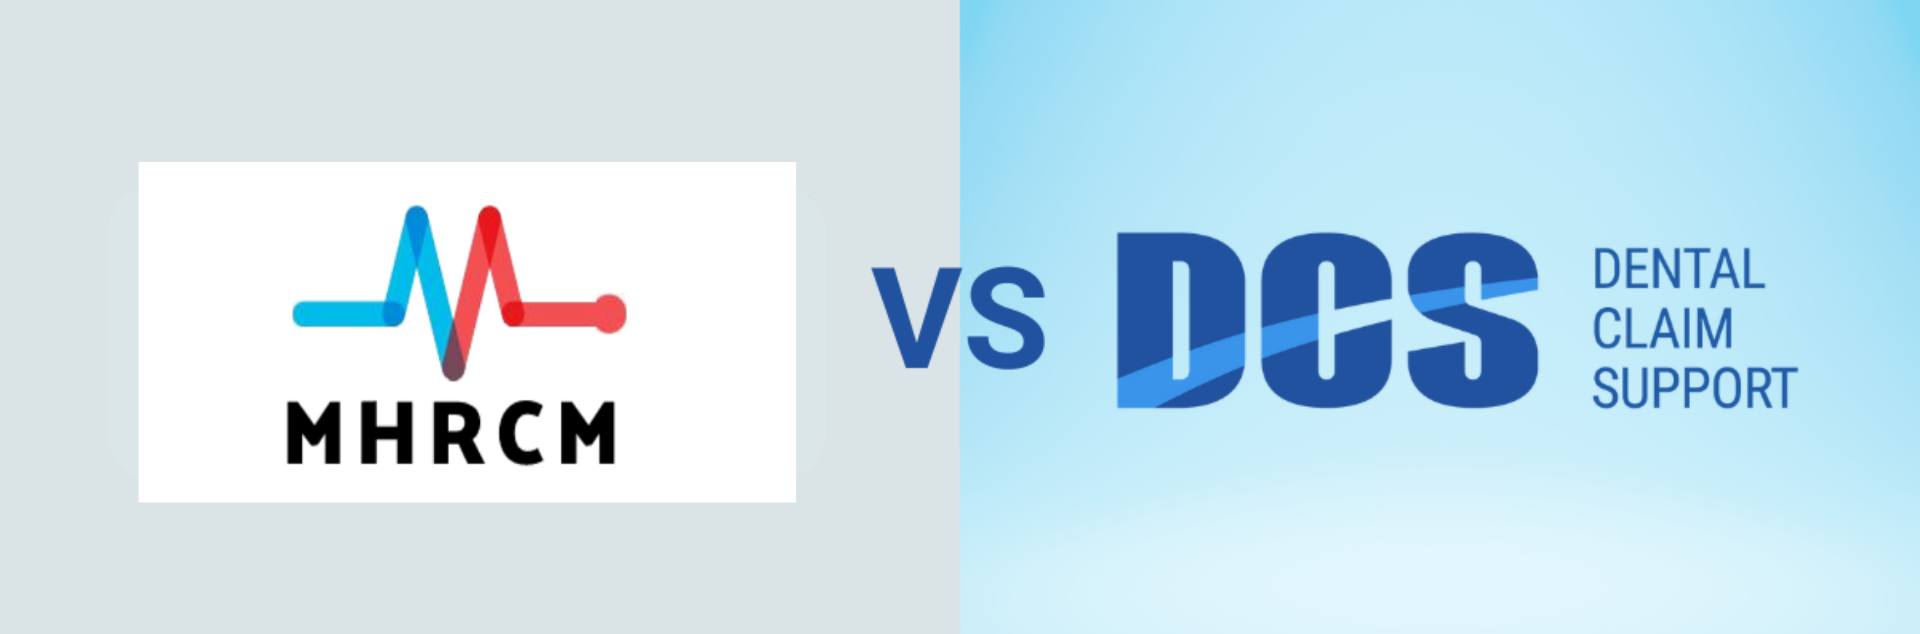 DCS vs MHRCM: Let's compare two top RCM companies [8 of 9]